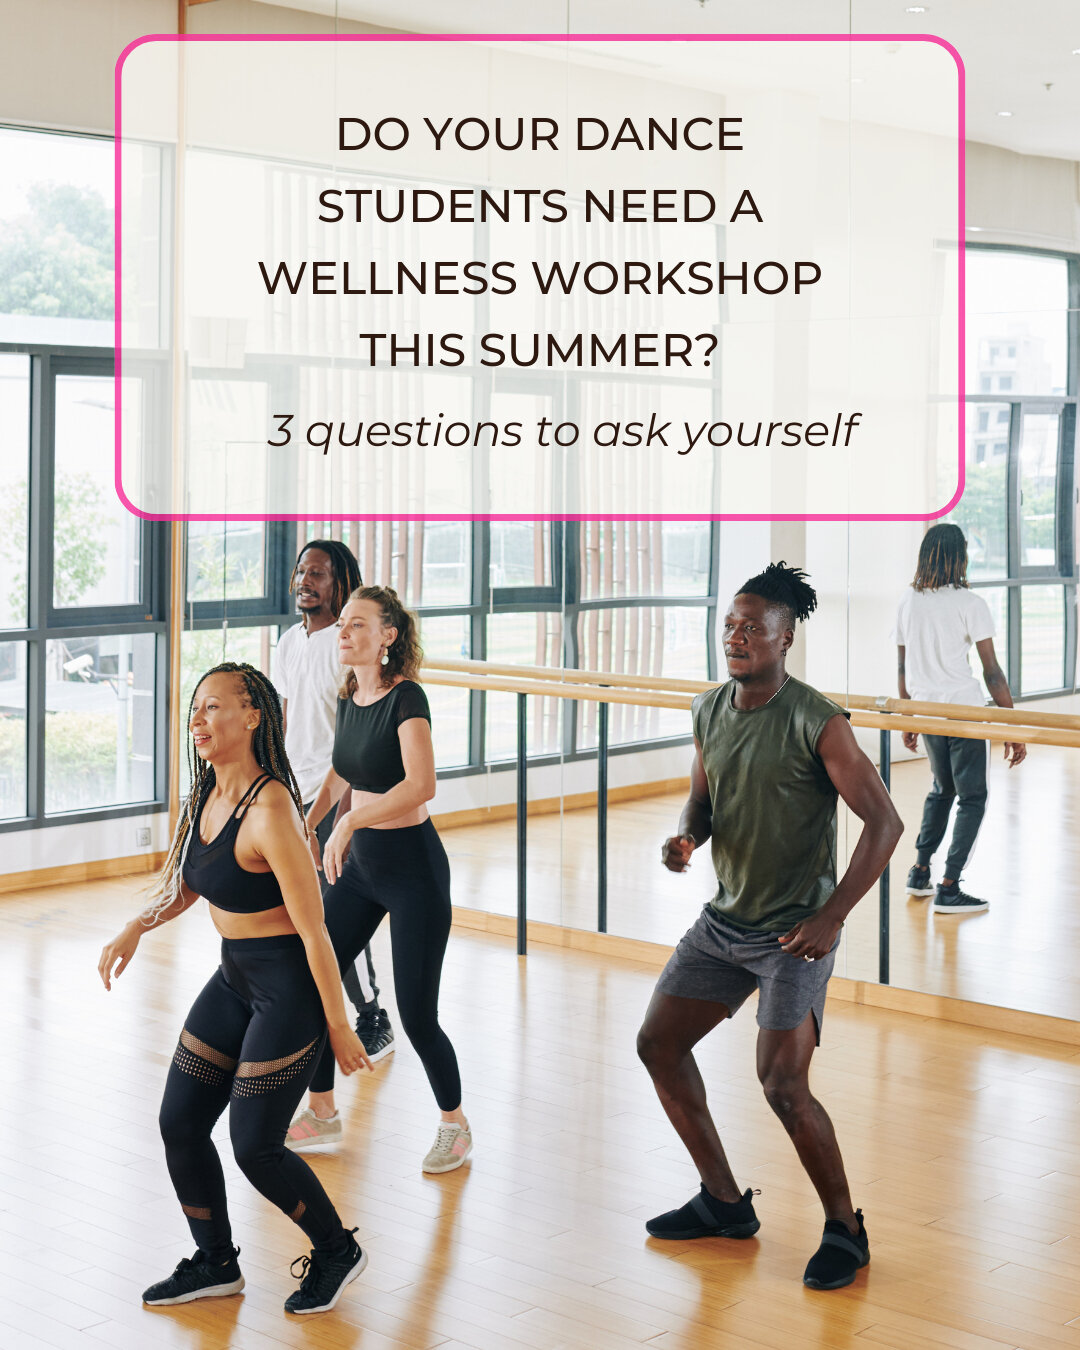 DO YOUR DANCERS NEED A WELLNESS WORKSHOP?​​​​​​​​​🤔
Here&rsquo;s 3 questions to ask yourself to find the answer:
1️⃣
Are my students unmotivated, and am I tired of trying to &ldquo;pump them up&rdquo;?
2️⃣
Have I had to convince students recently no